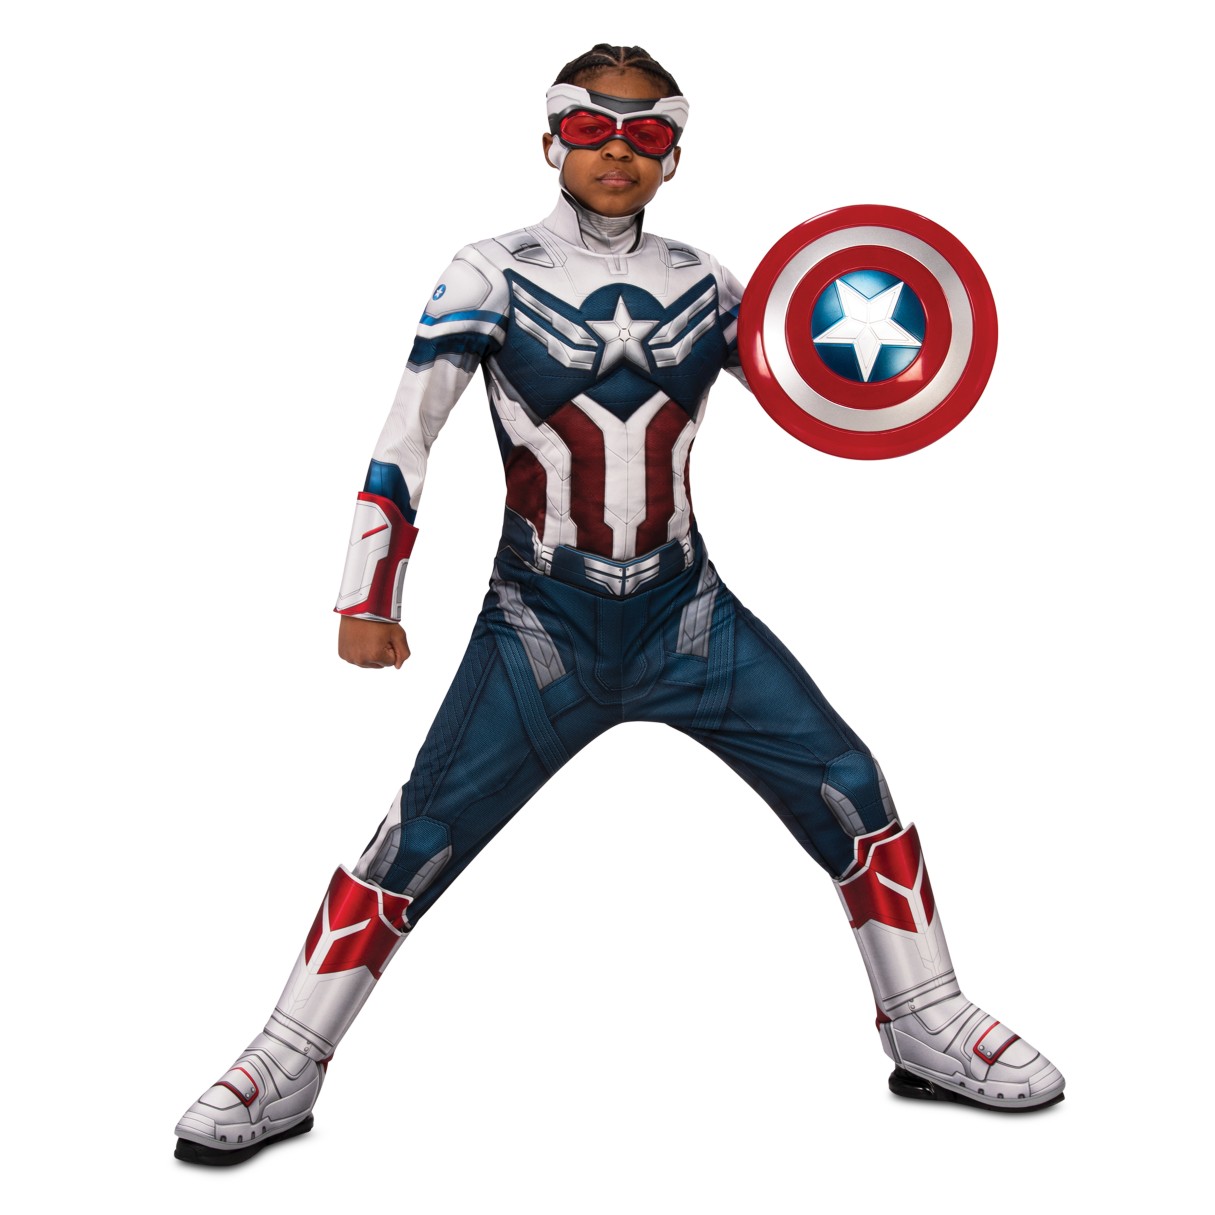 Captain America Deluxe Costume for Kids by Rubies – The Falcon and the Winter Soldier